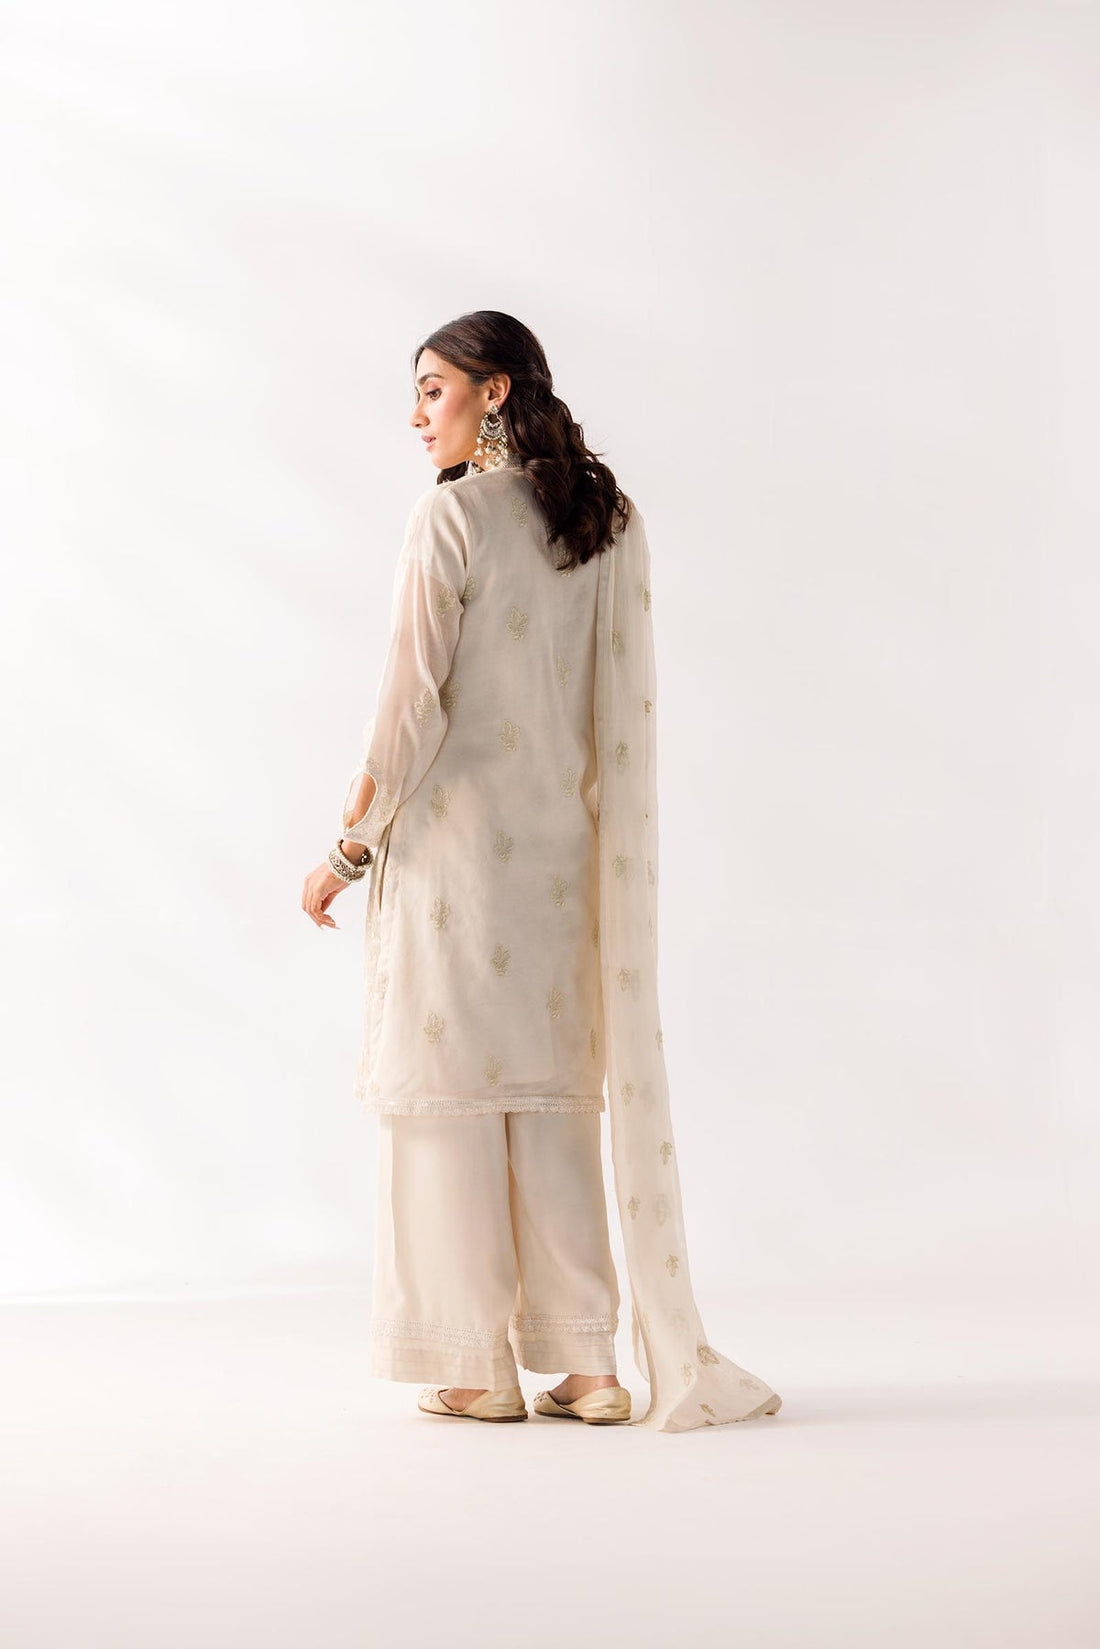 TaanaBaana | Luxe Line | F0386A - Khanumjan  Pakistani Clothes and Designer Dresses in UK, USA 